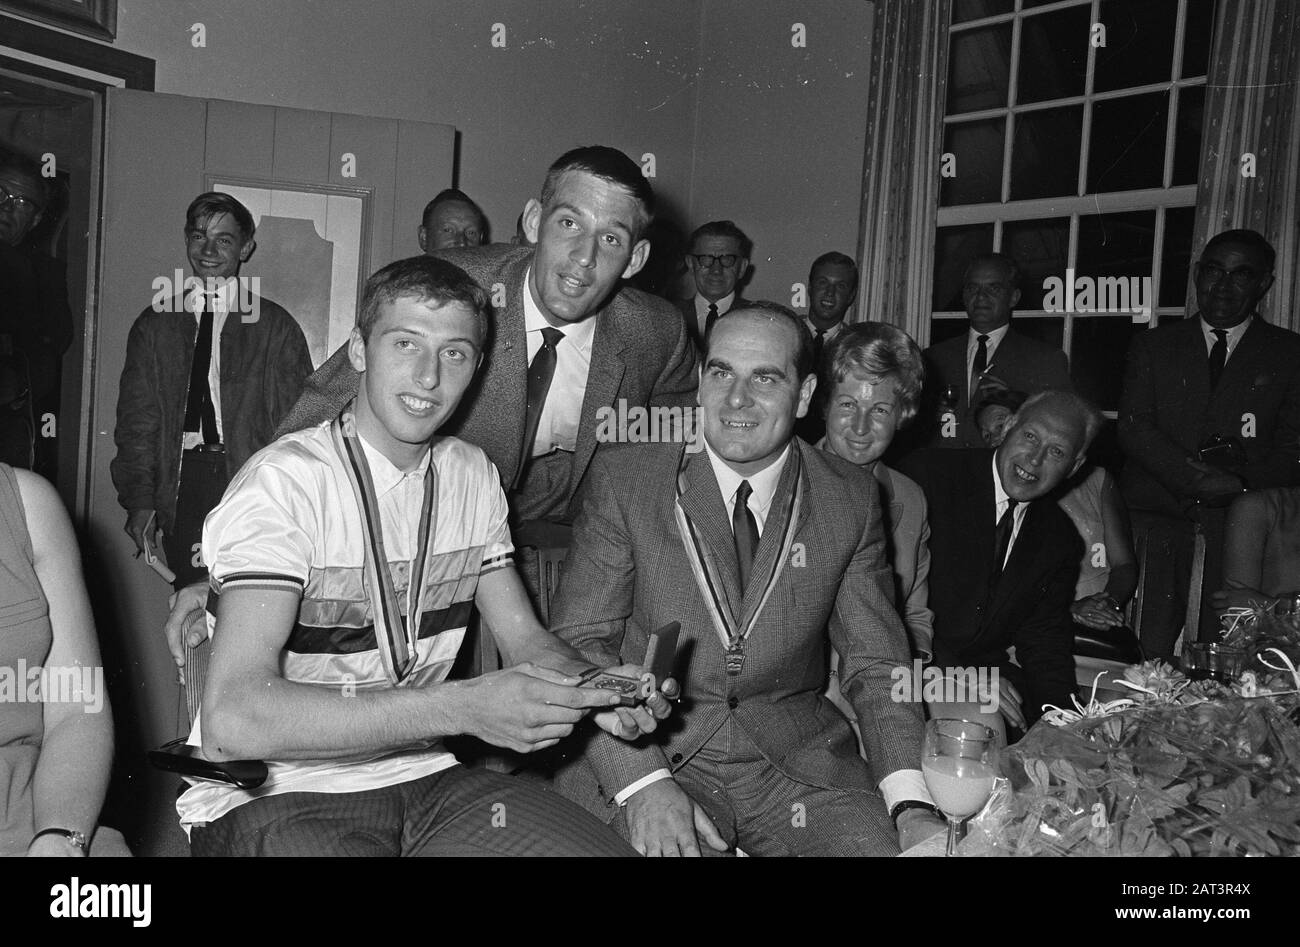 Huldiging Piet de Wit in Wormer. Here together with Noppi Koch in car Date:  August 28, 1967 Location: Noord-Holland, Wormer, Zaanstad Keywords: Autos,  tributes, cycling Person name: Koch, Noppie, Wit, Piet de